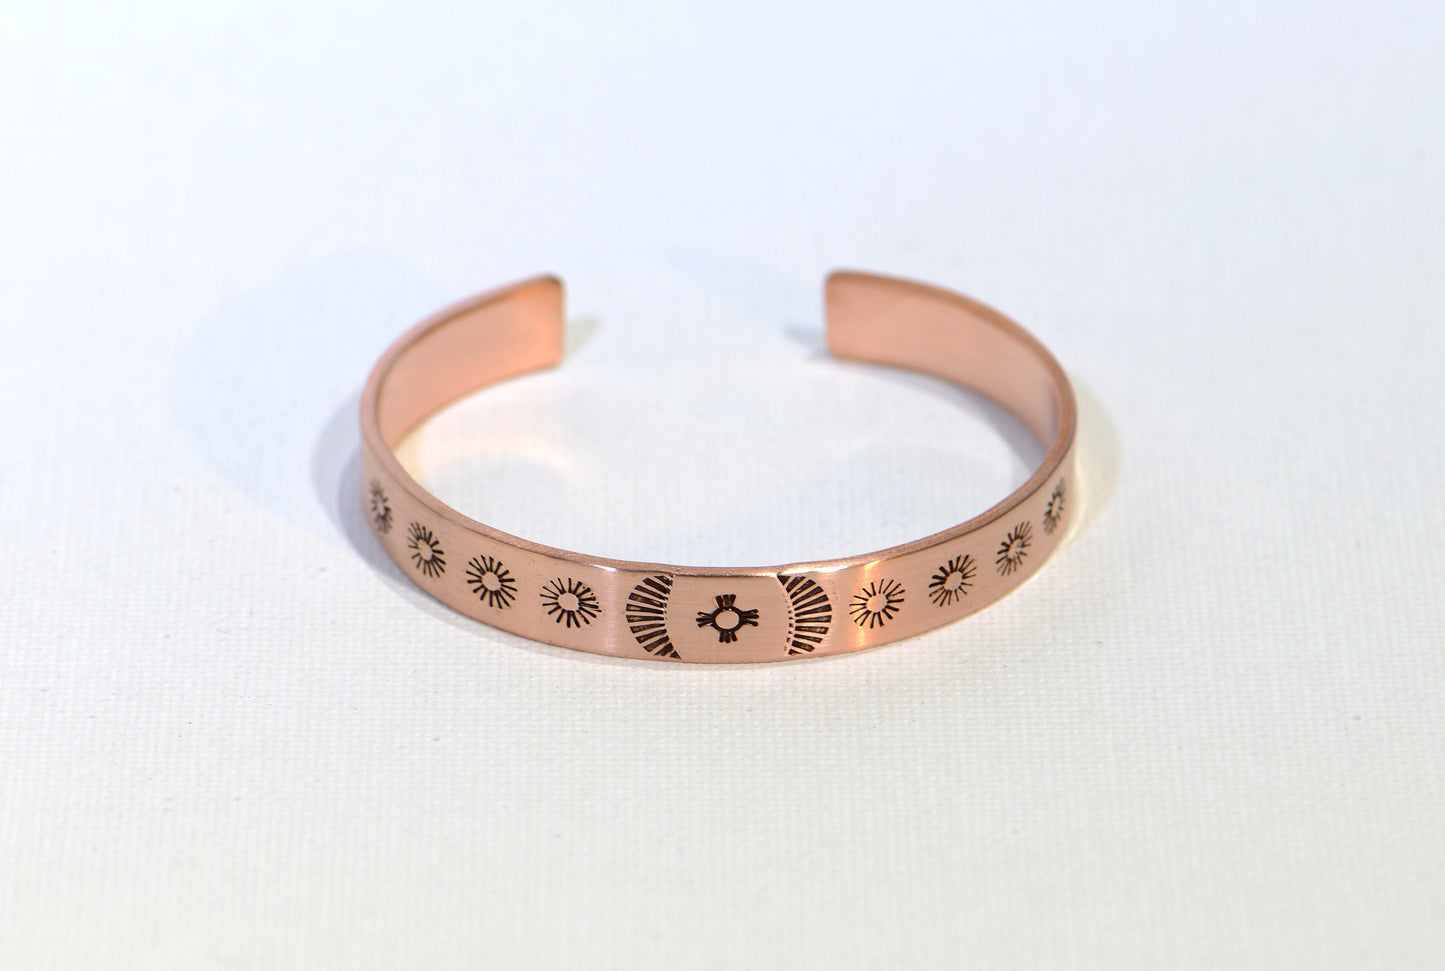 Cuff bracelet hand stamped with zia symbol and southwestern patterns in copper